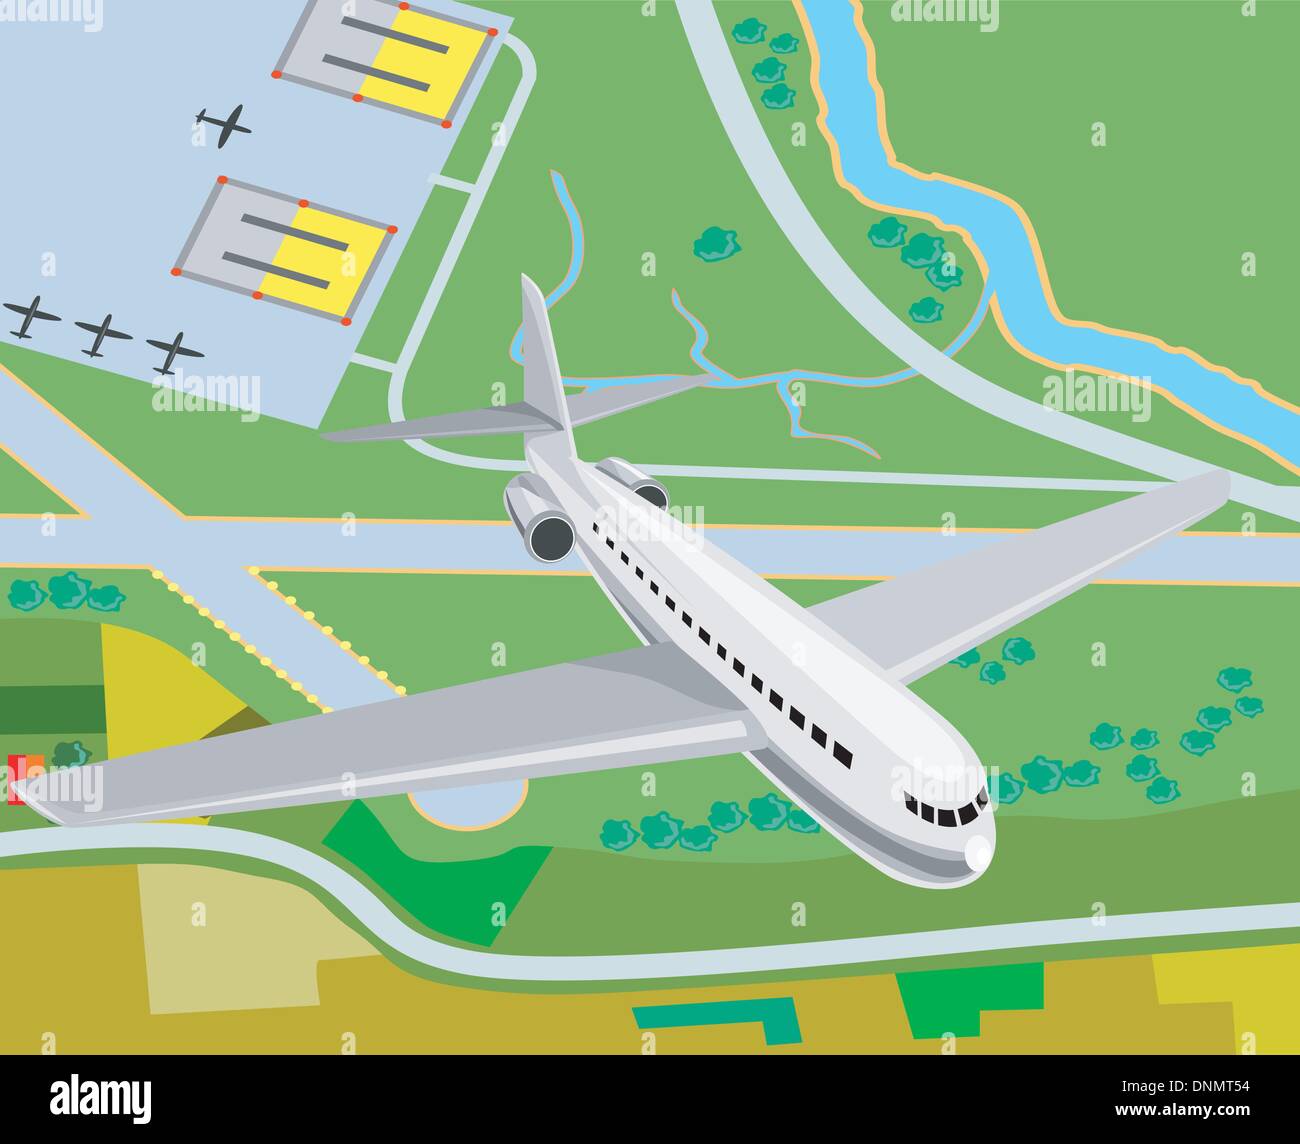 Illustration of a commercial jet plane airliner aerial view. Stock Vector